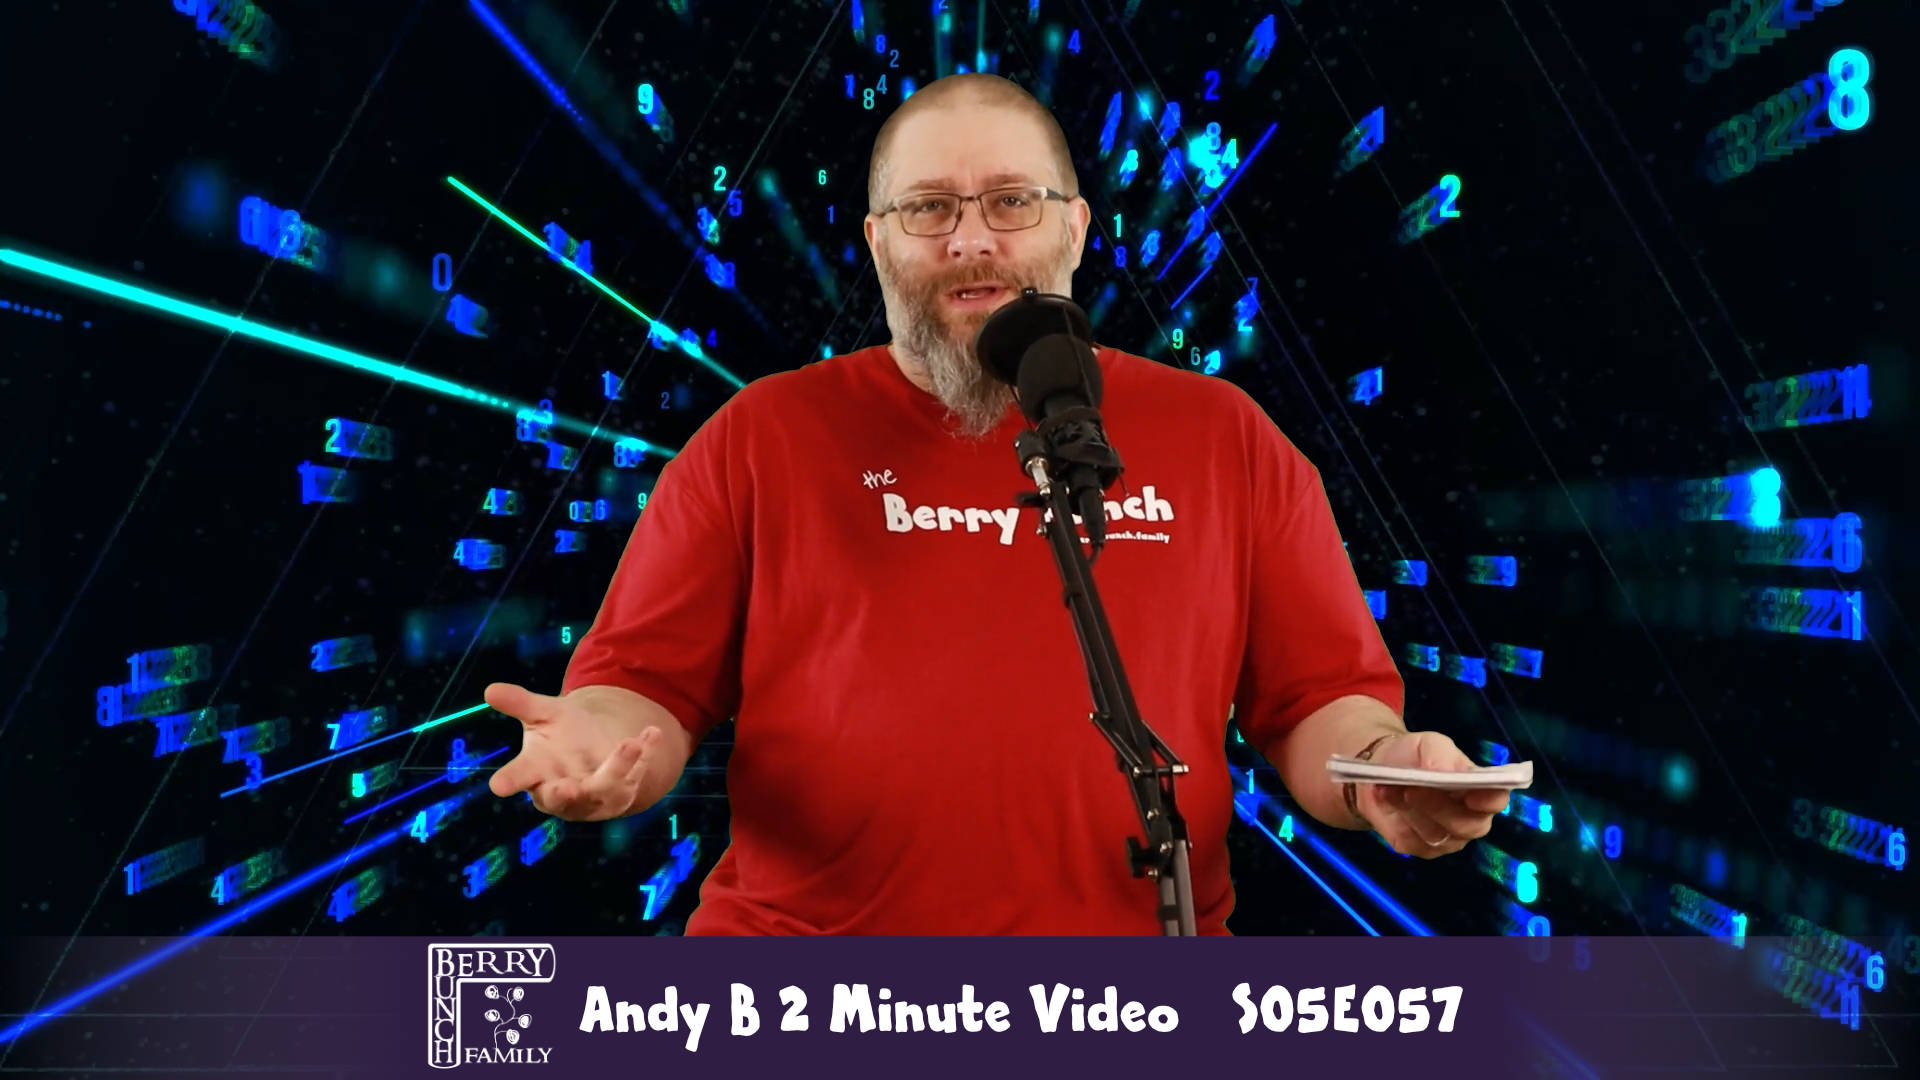 S05E057, Pounding Hearts, and Rest, Andy B 2 Minute Video